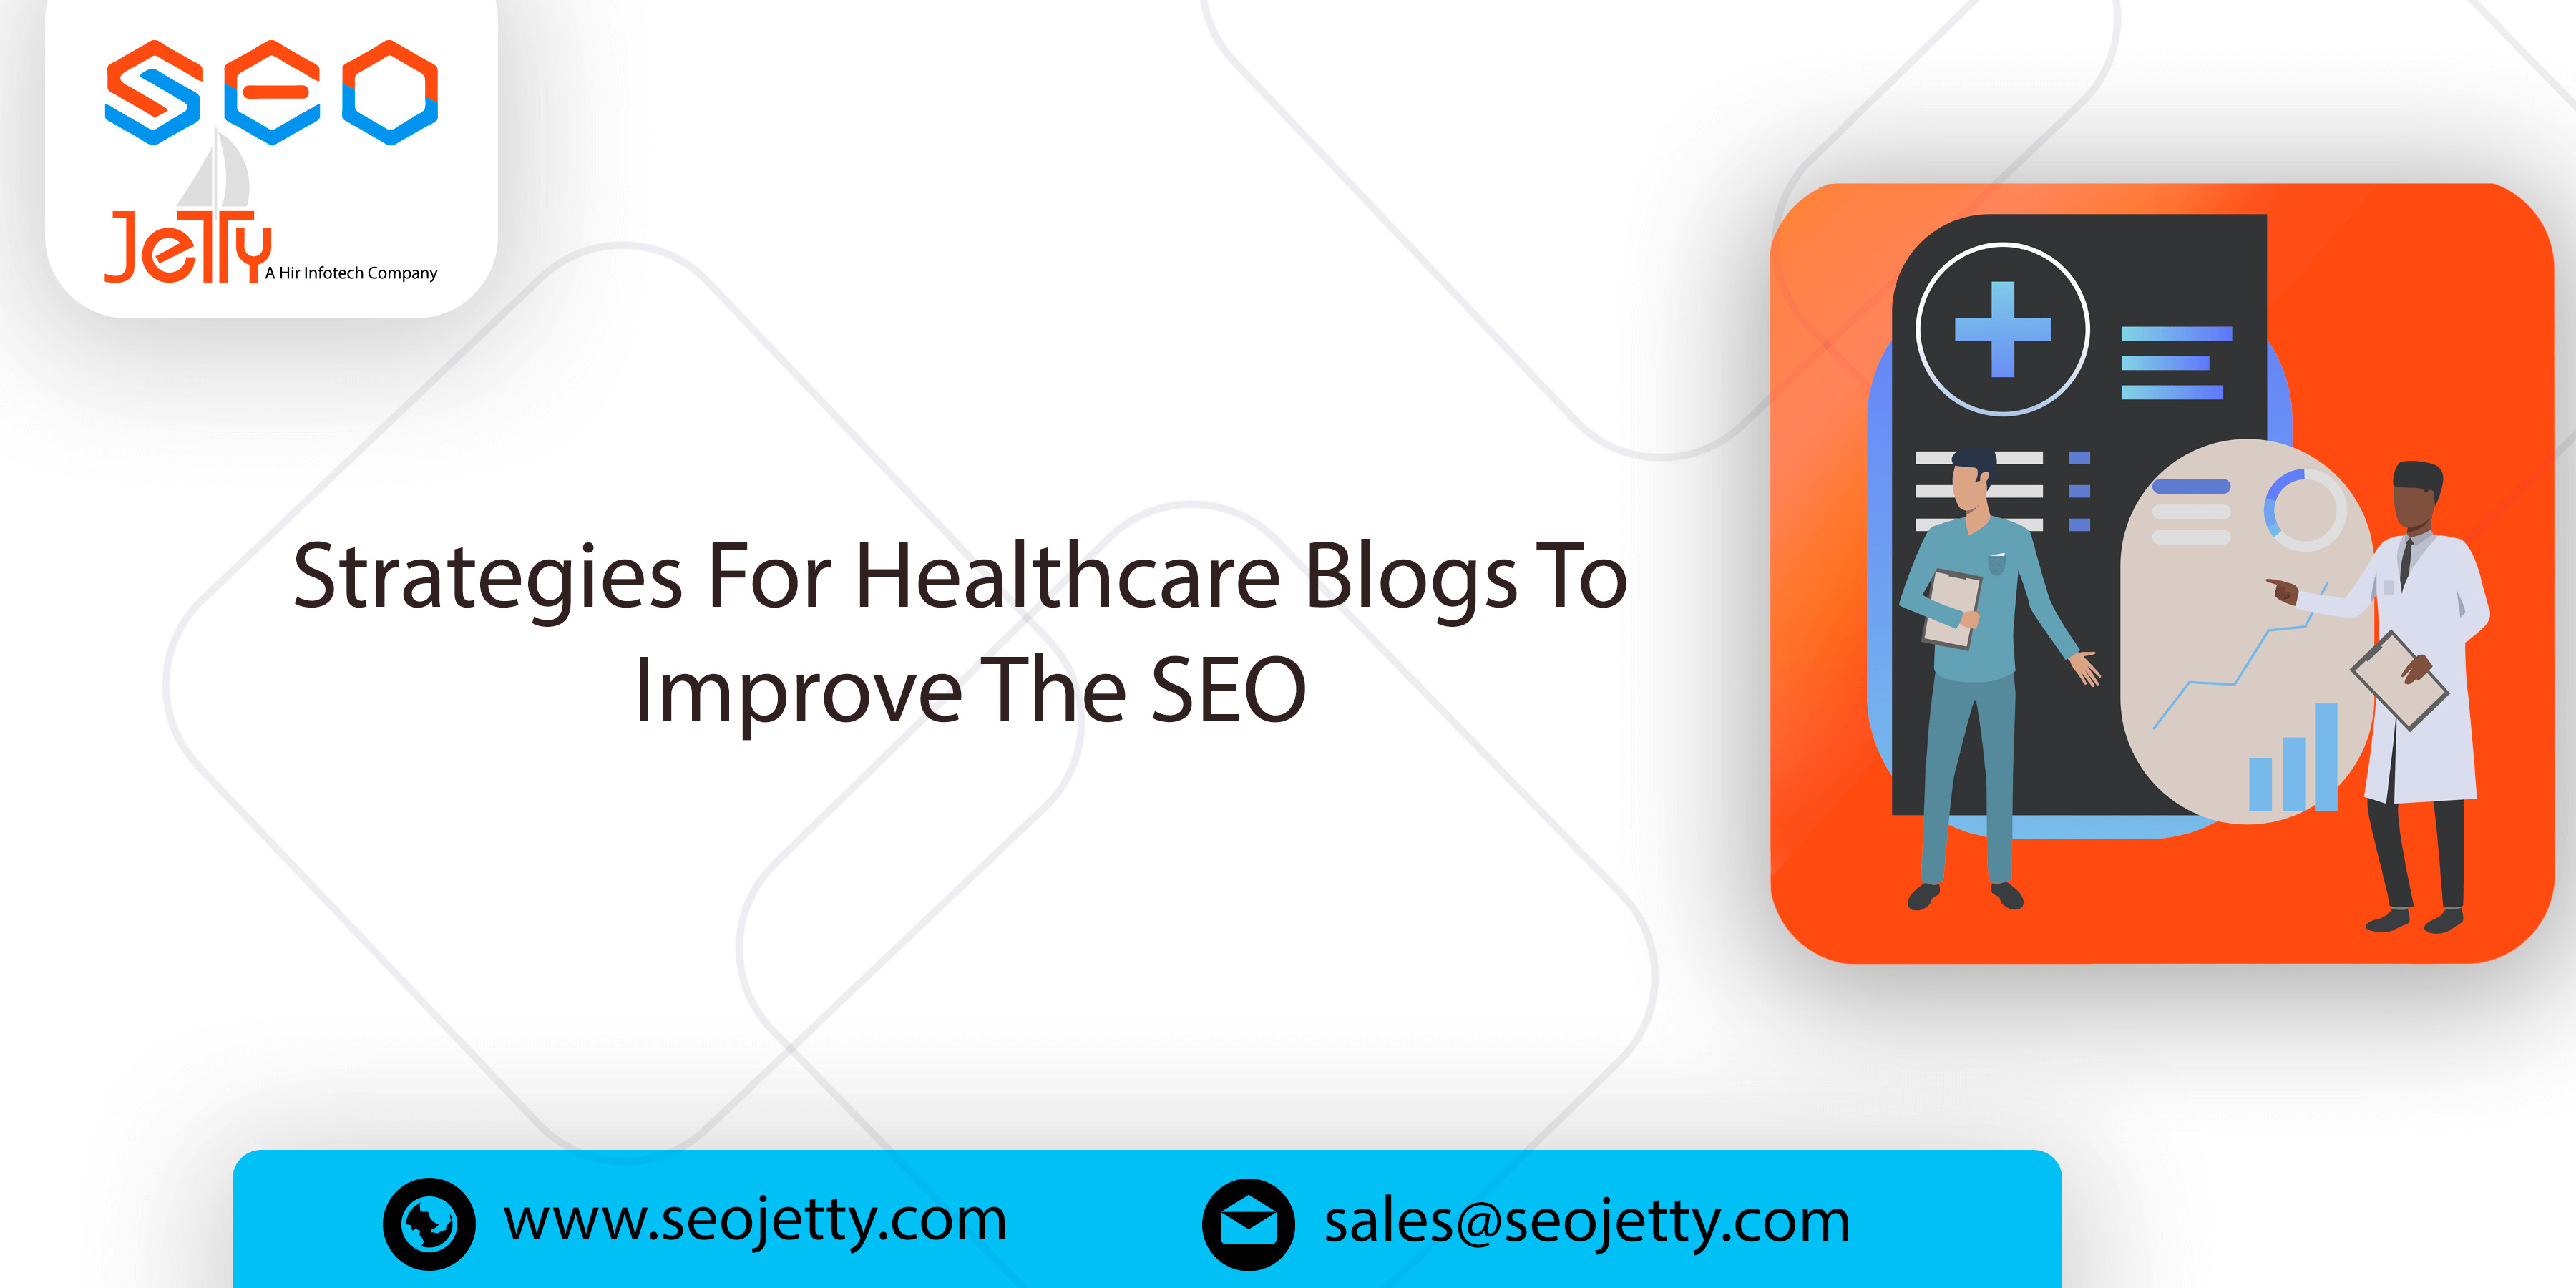 Strategies For Healthcare Blogs To Improve The SEO